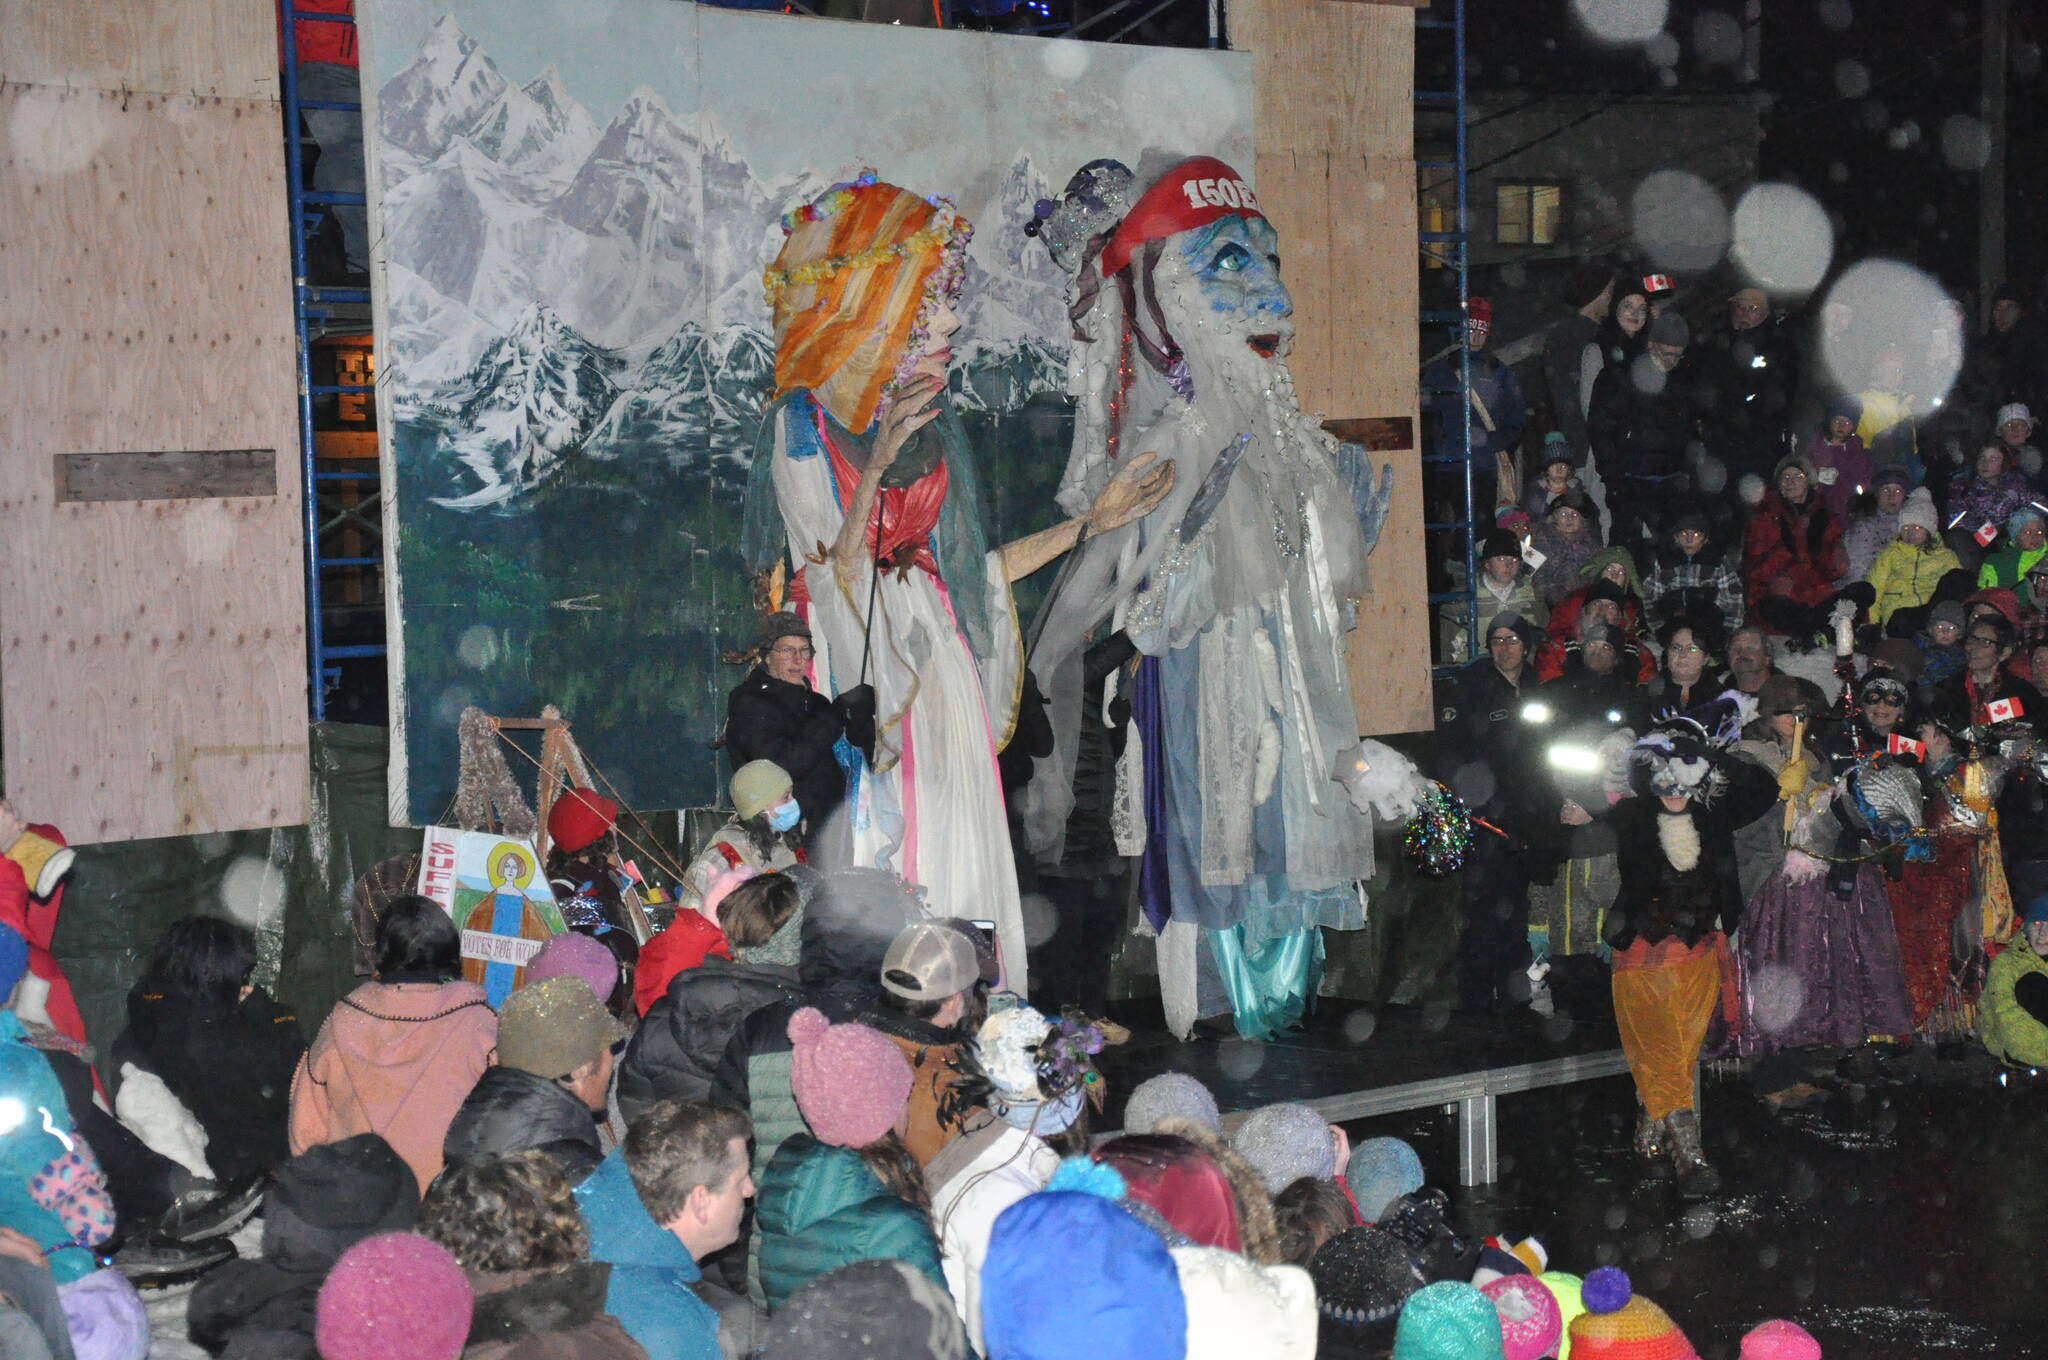 The Snow King and Lady spring stood on stage to watch over the Masque Parade in Spirit Square. Star Photo